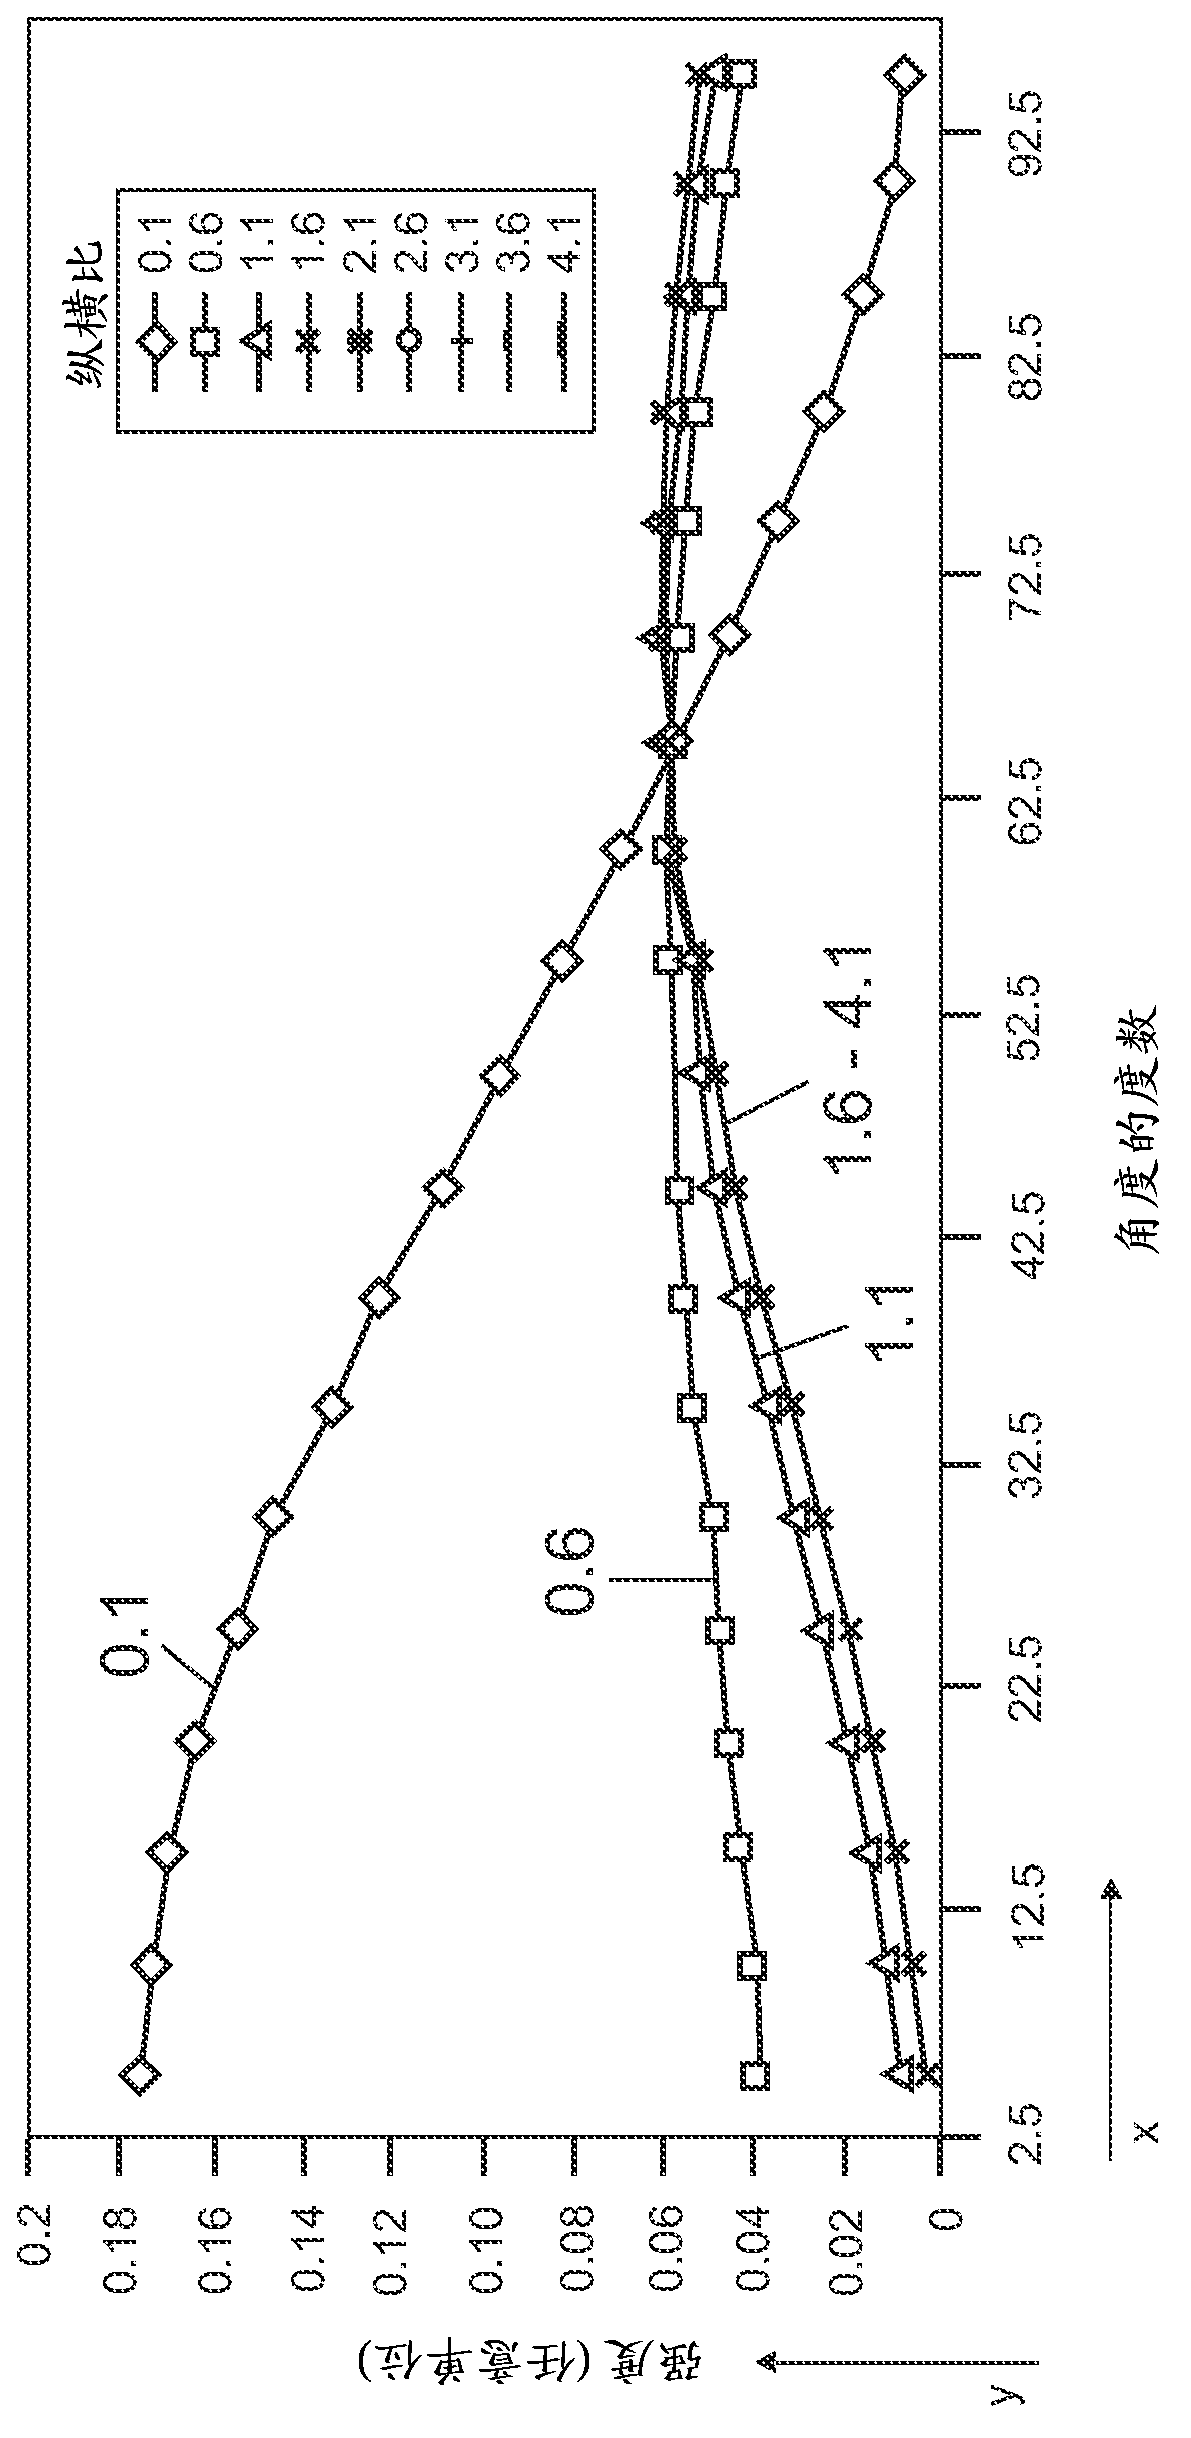 Optoelectronic component and method for producing an optoelectronic component